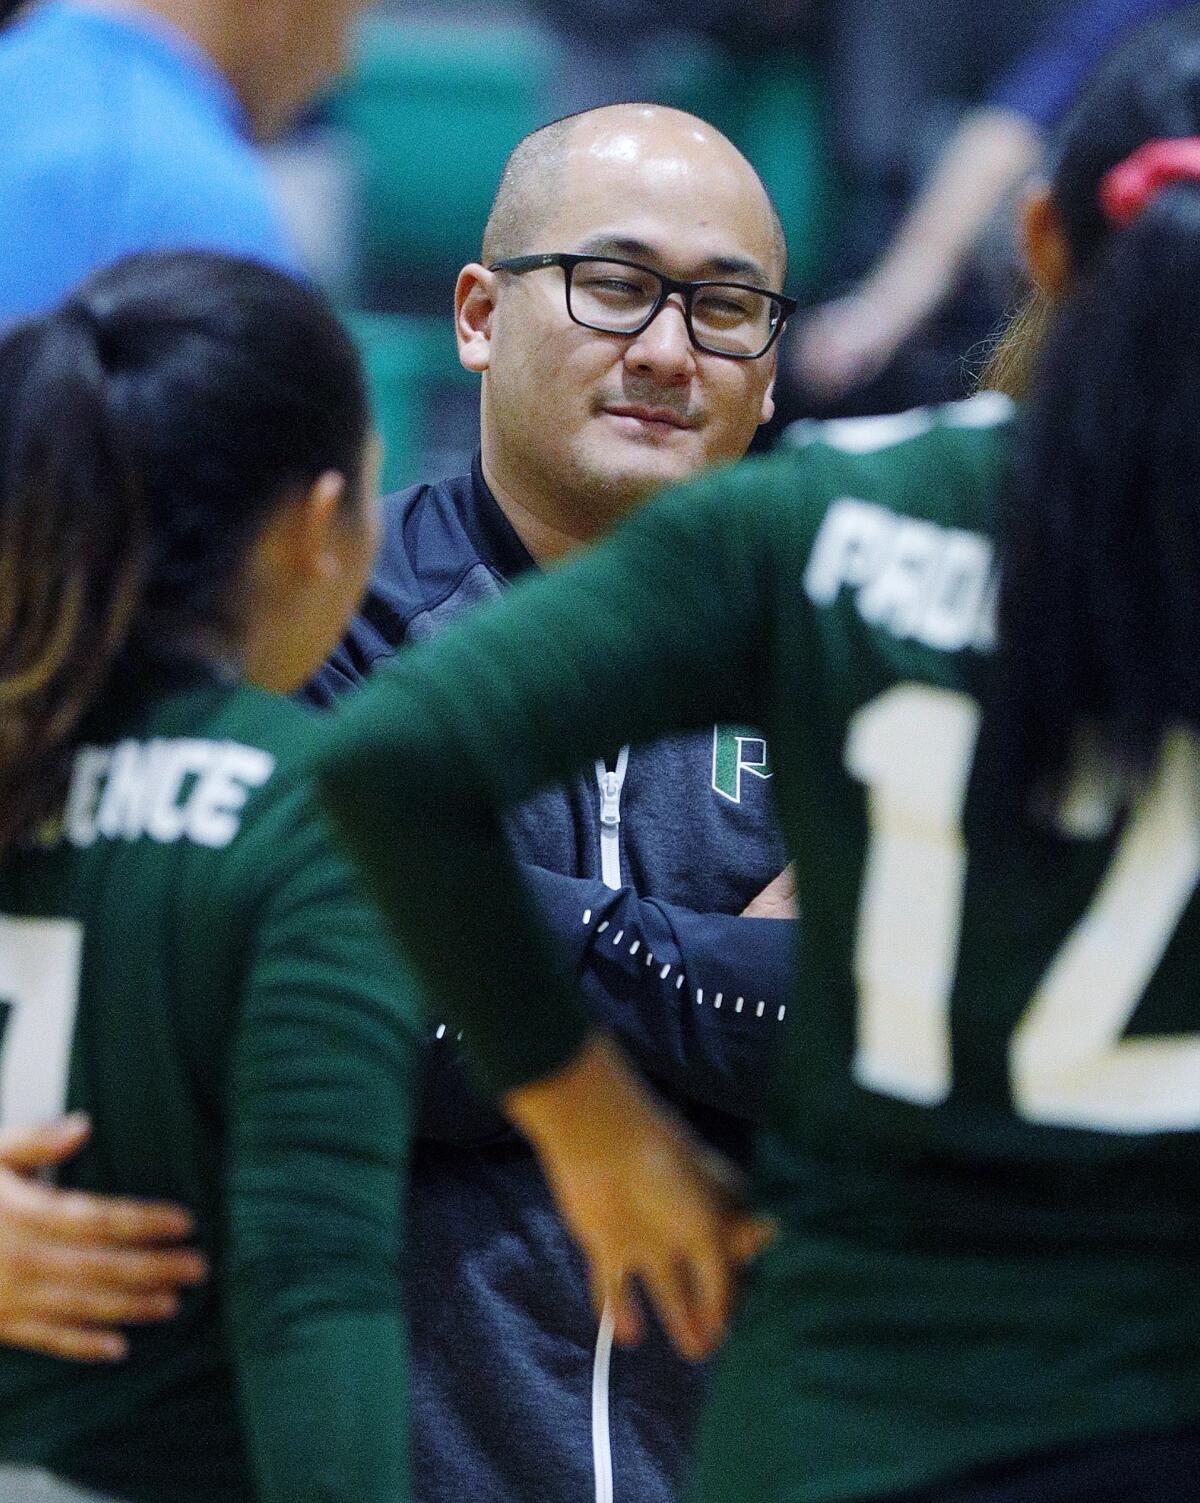 Providence's head coach James Jimenez gathers his team during a timeout in the match with Polytechnic at a Prep League girls' volleyball match at Providence High School on Tuesday, September 17, 2019.